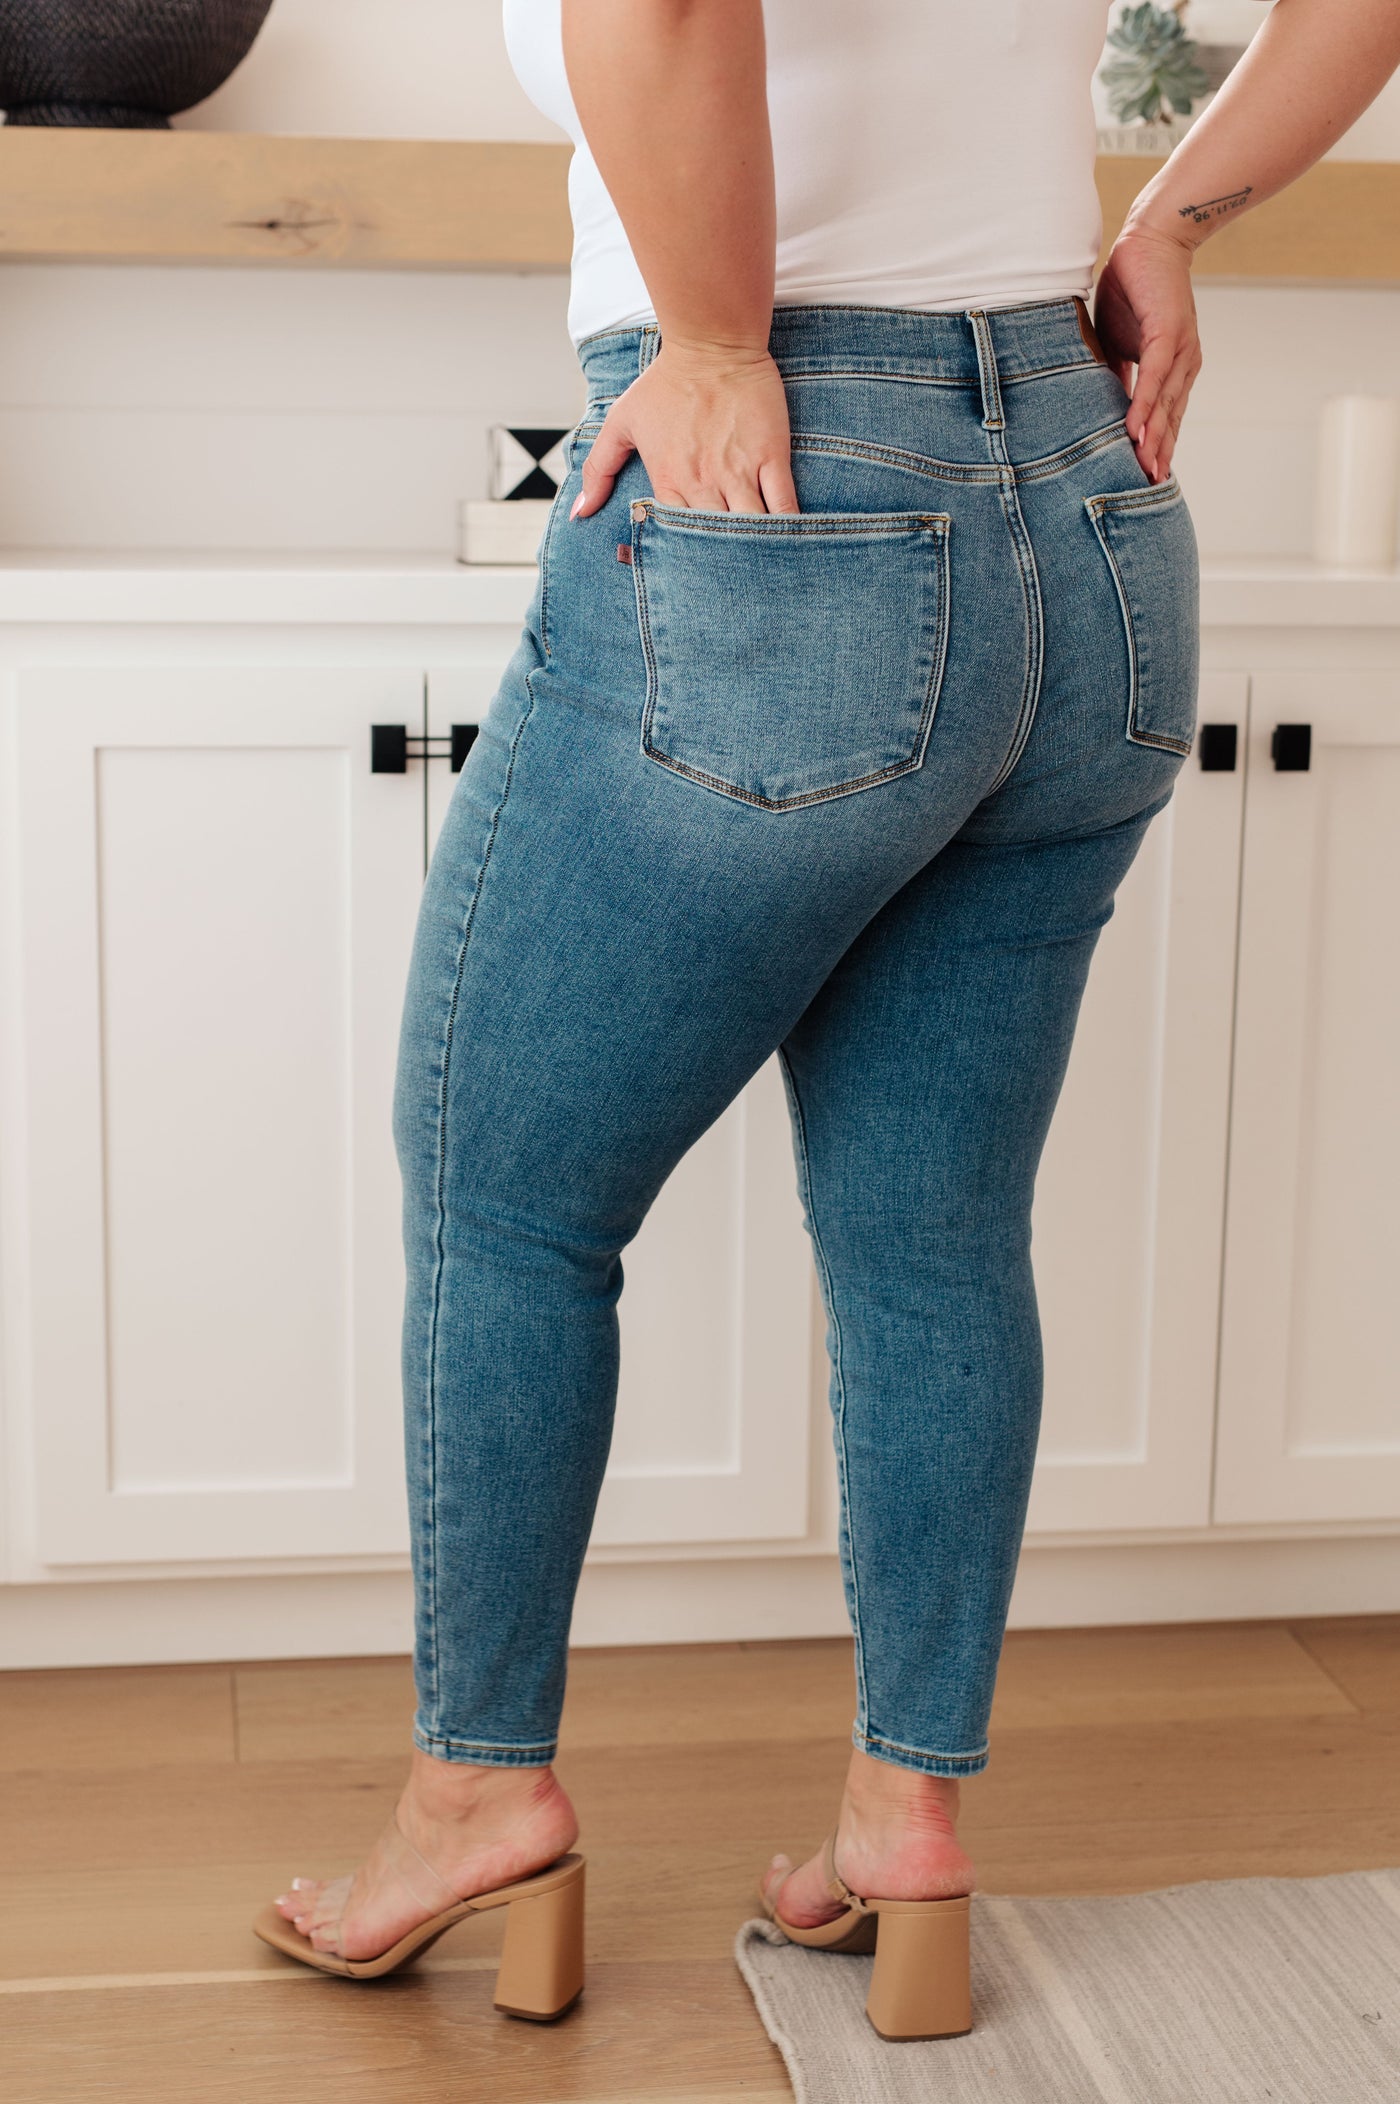 Stay comfortable and stylish in these Bryant High Rise Thermal Skinny Jeans from Judy Blue. Made with brushed thermal denim, they provide a soft and warm feel that's perfect for colder months